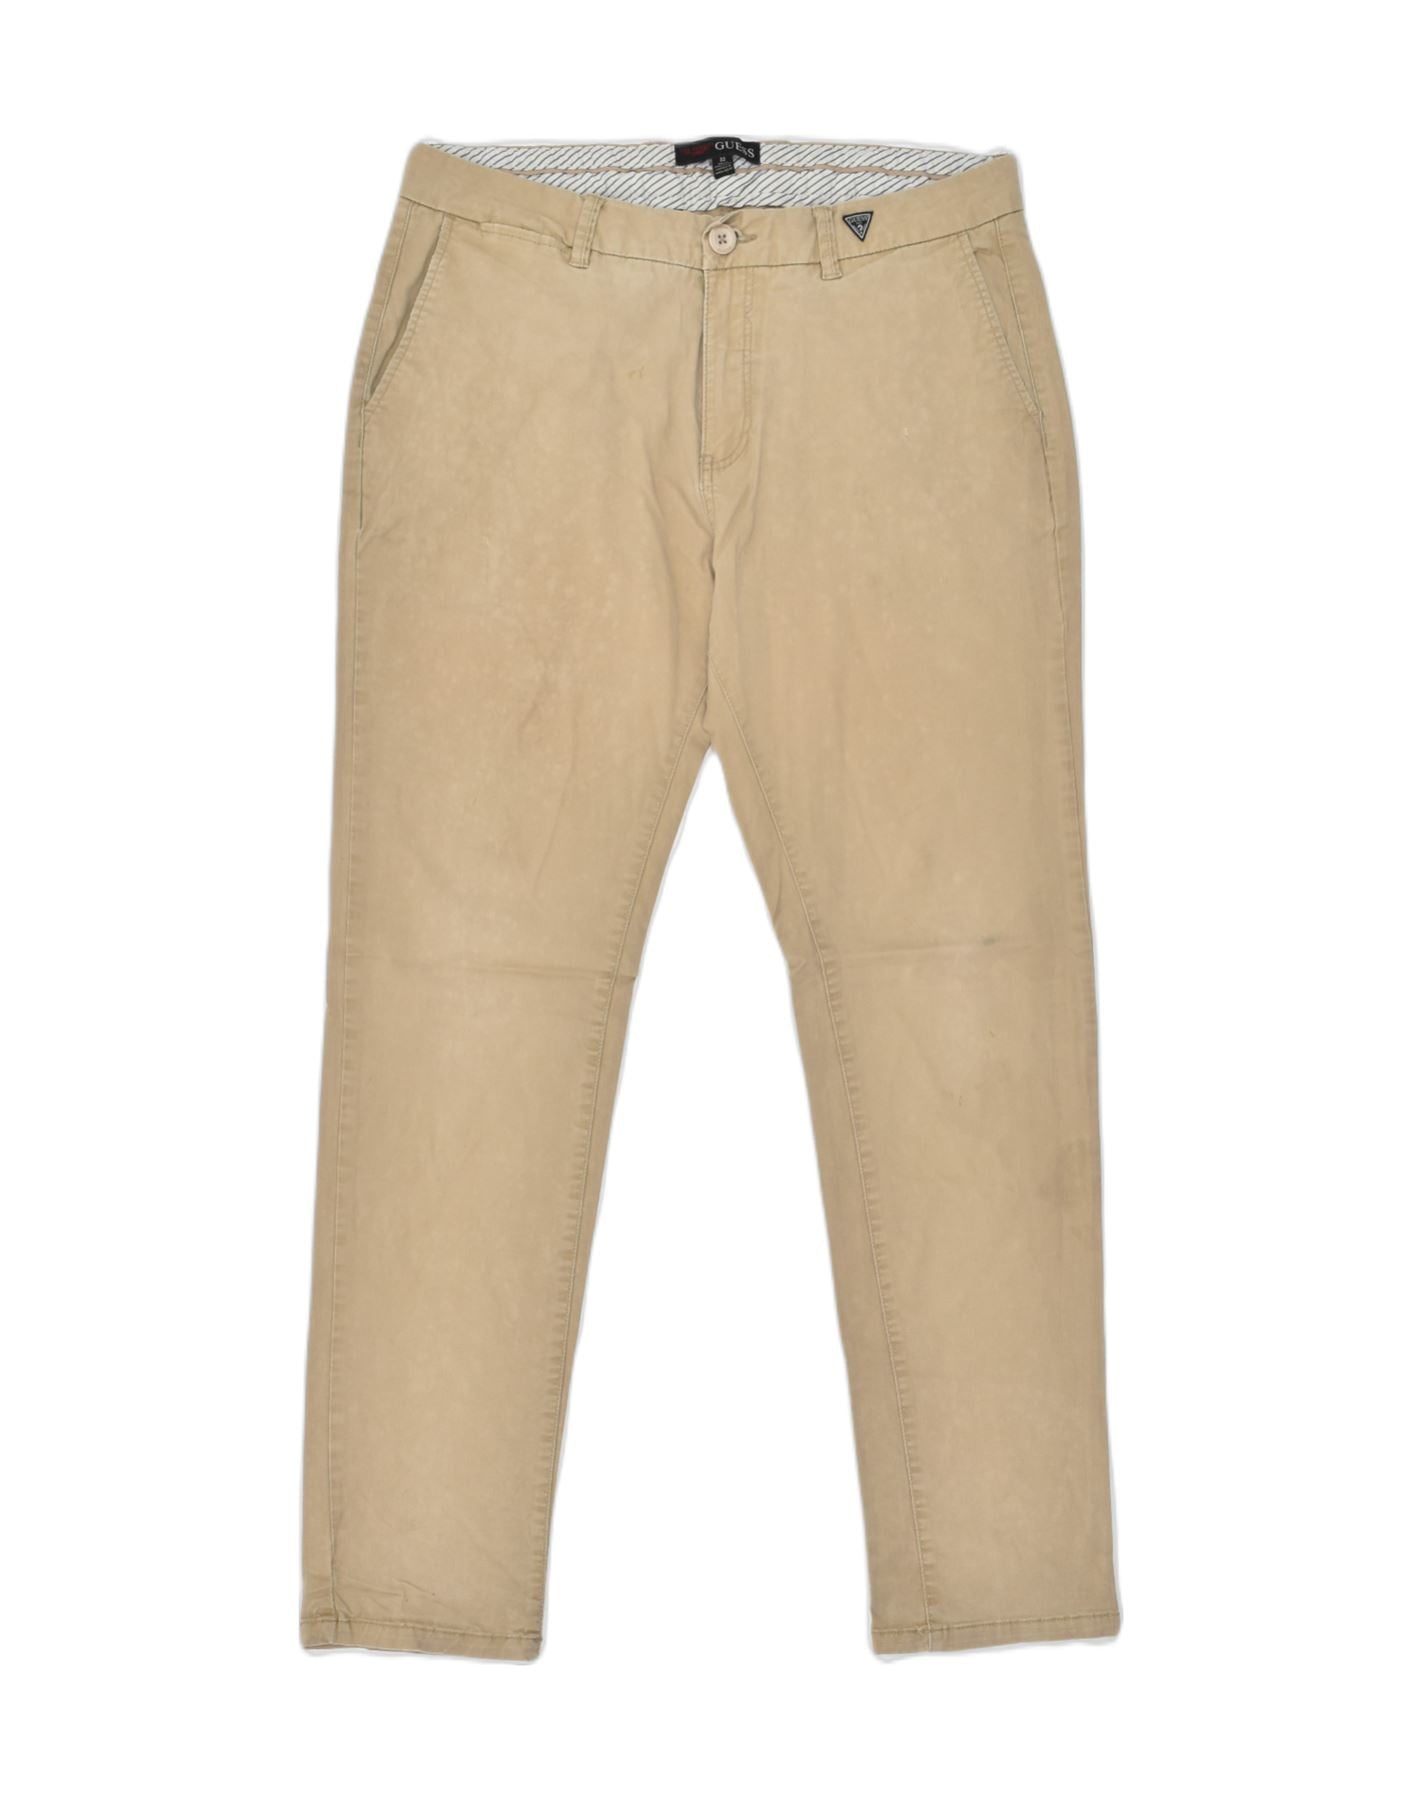 GUESS Mens Slim Fit Chino Trousers W33 L30 Beige Cotton, Vintage &  Second-Hand Clothing Online